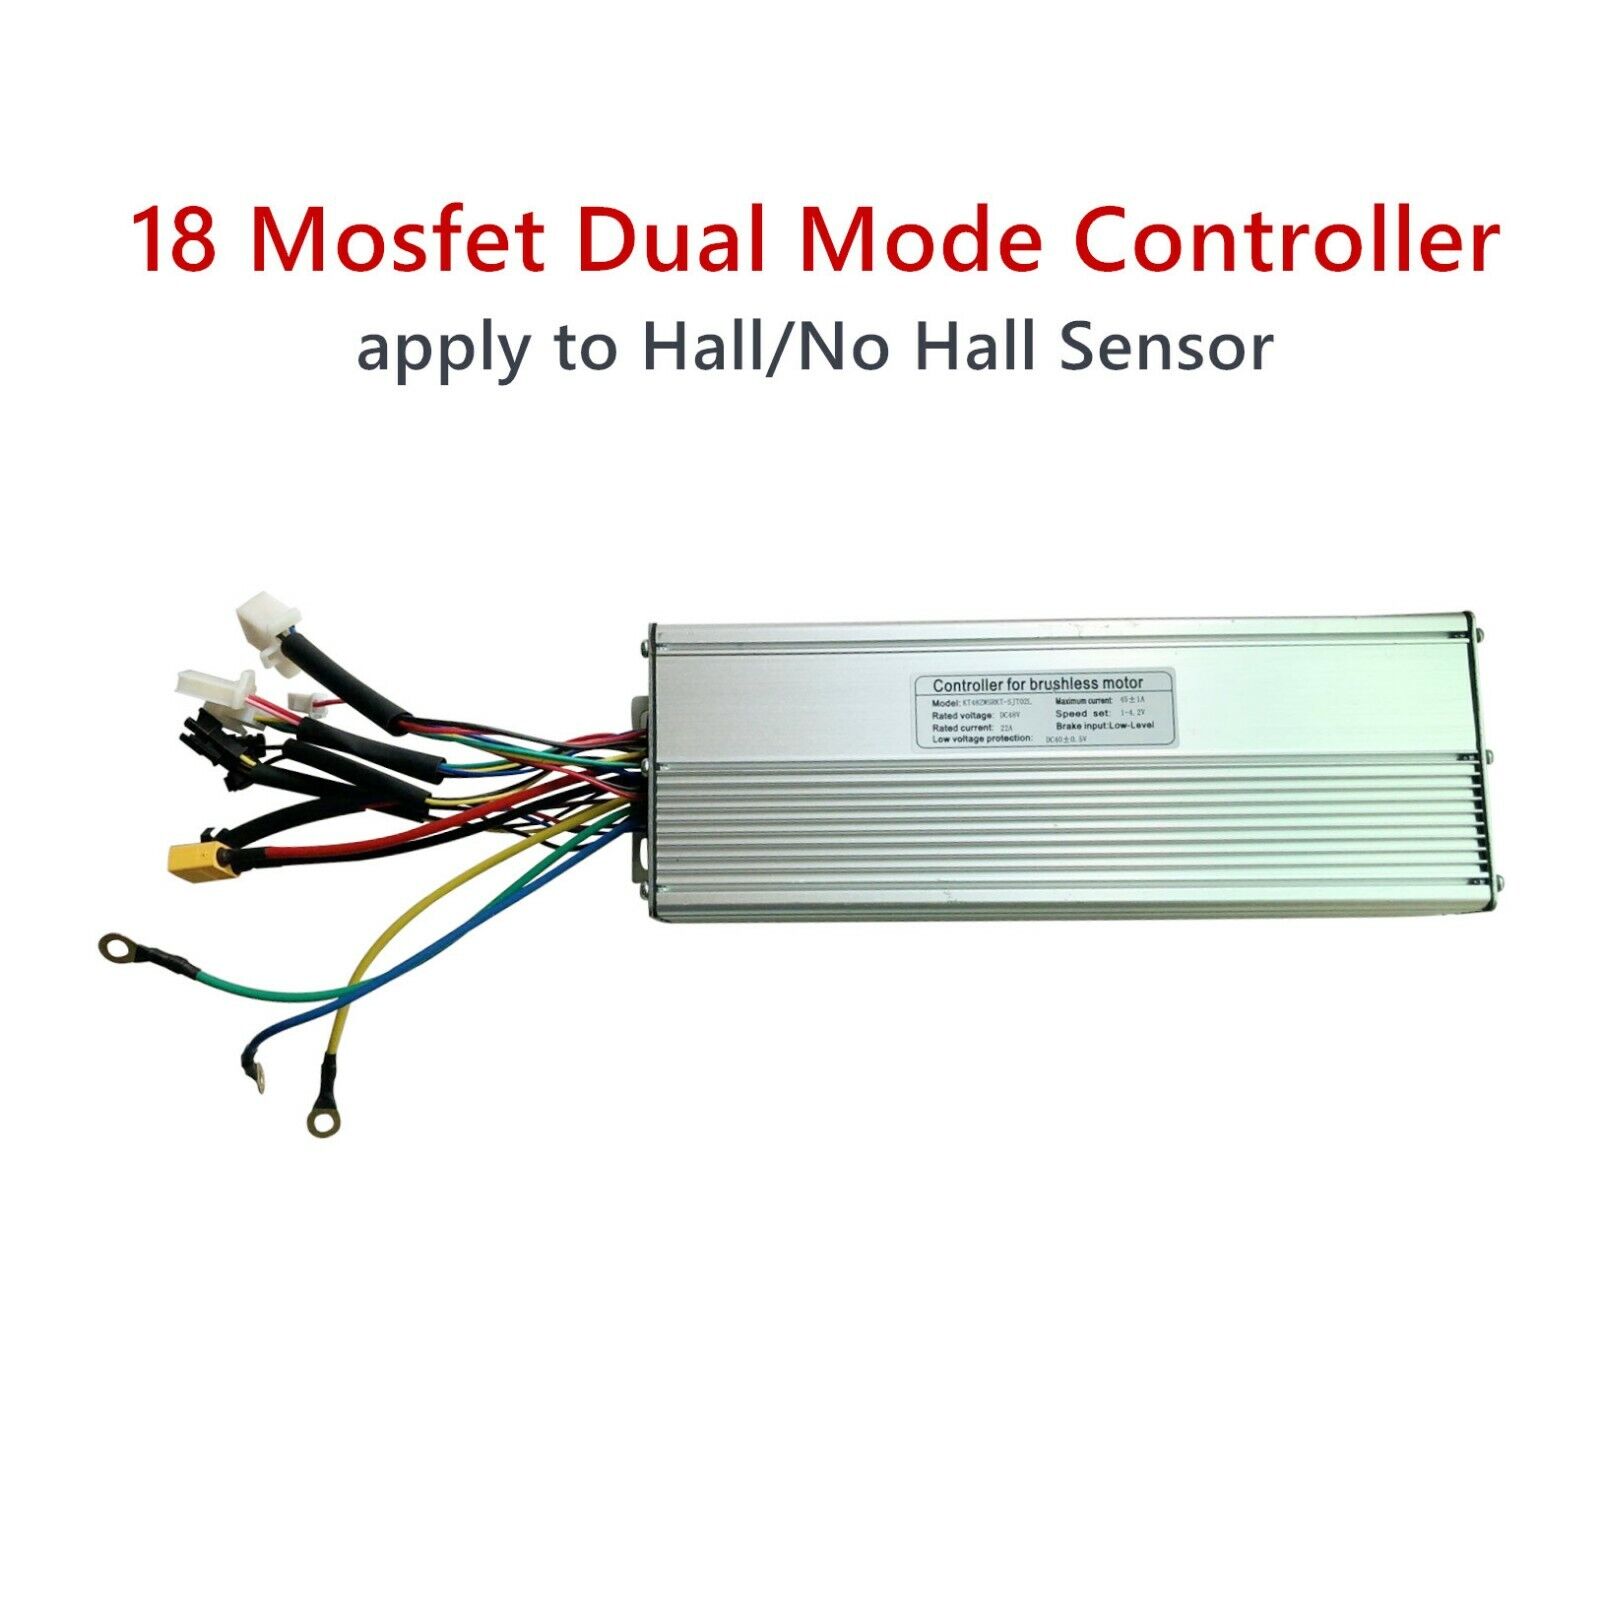 E- Bike Controller 18 Mosfet KT Controller for 48V 1500W 2000W DC Hub Motor Unbranded Does Not Apply